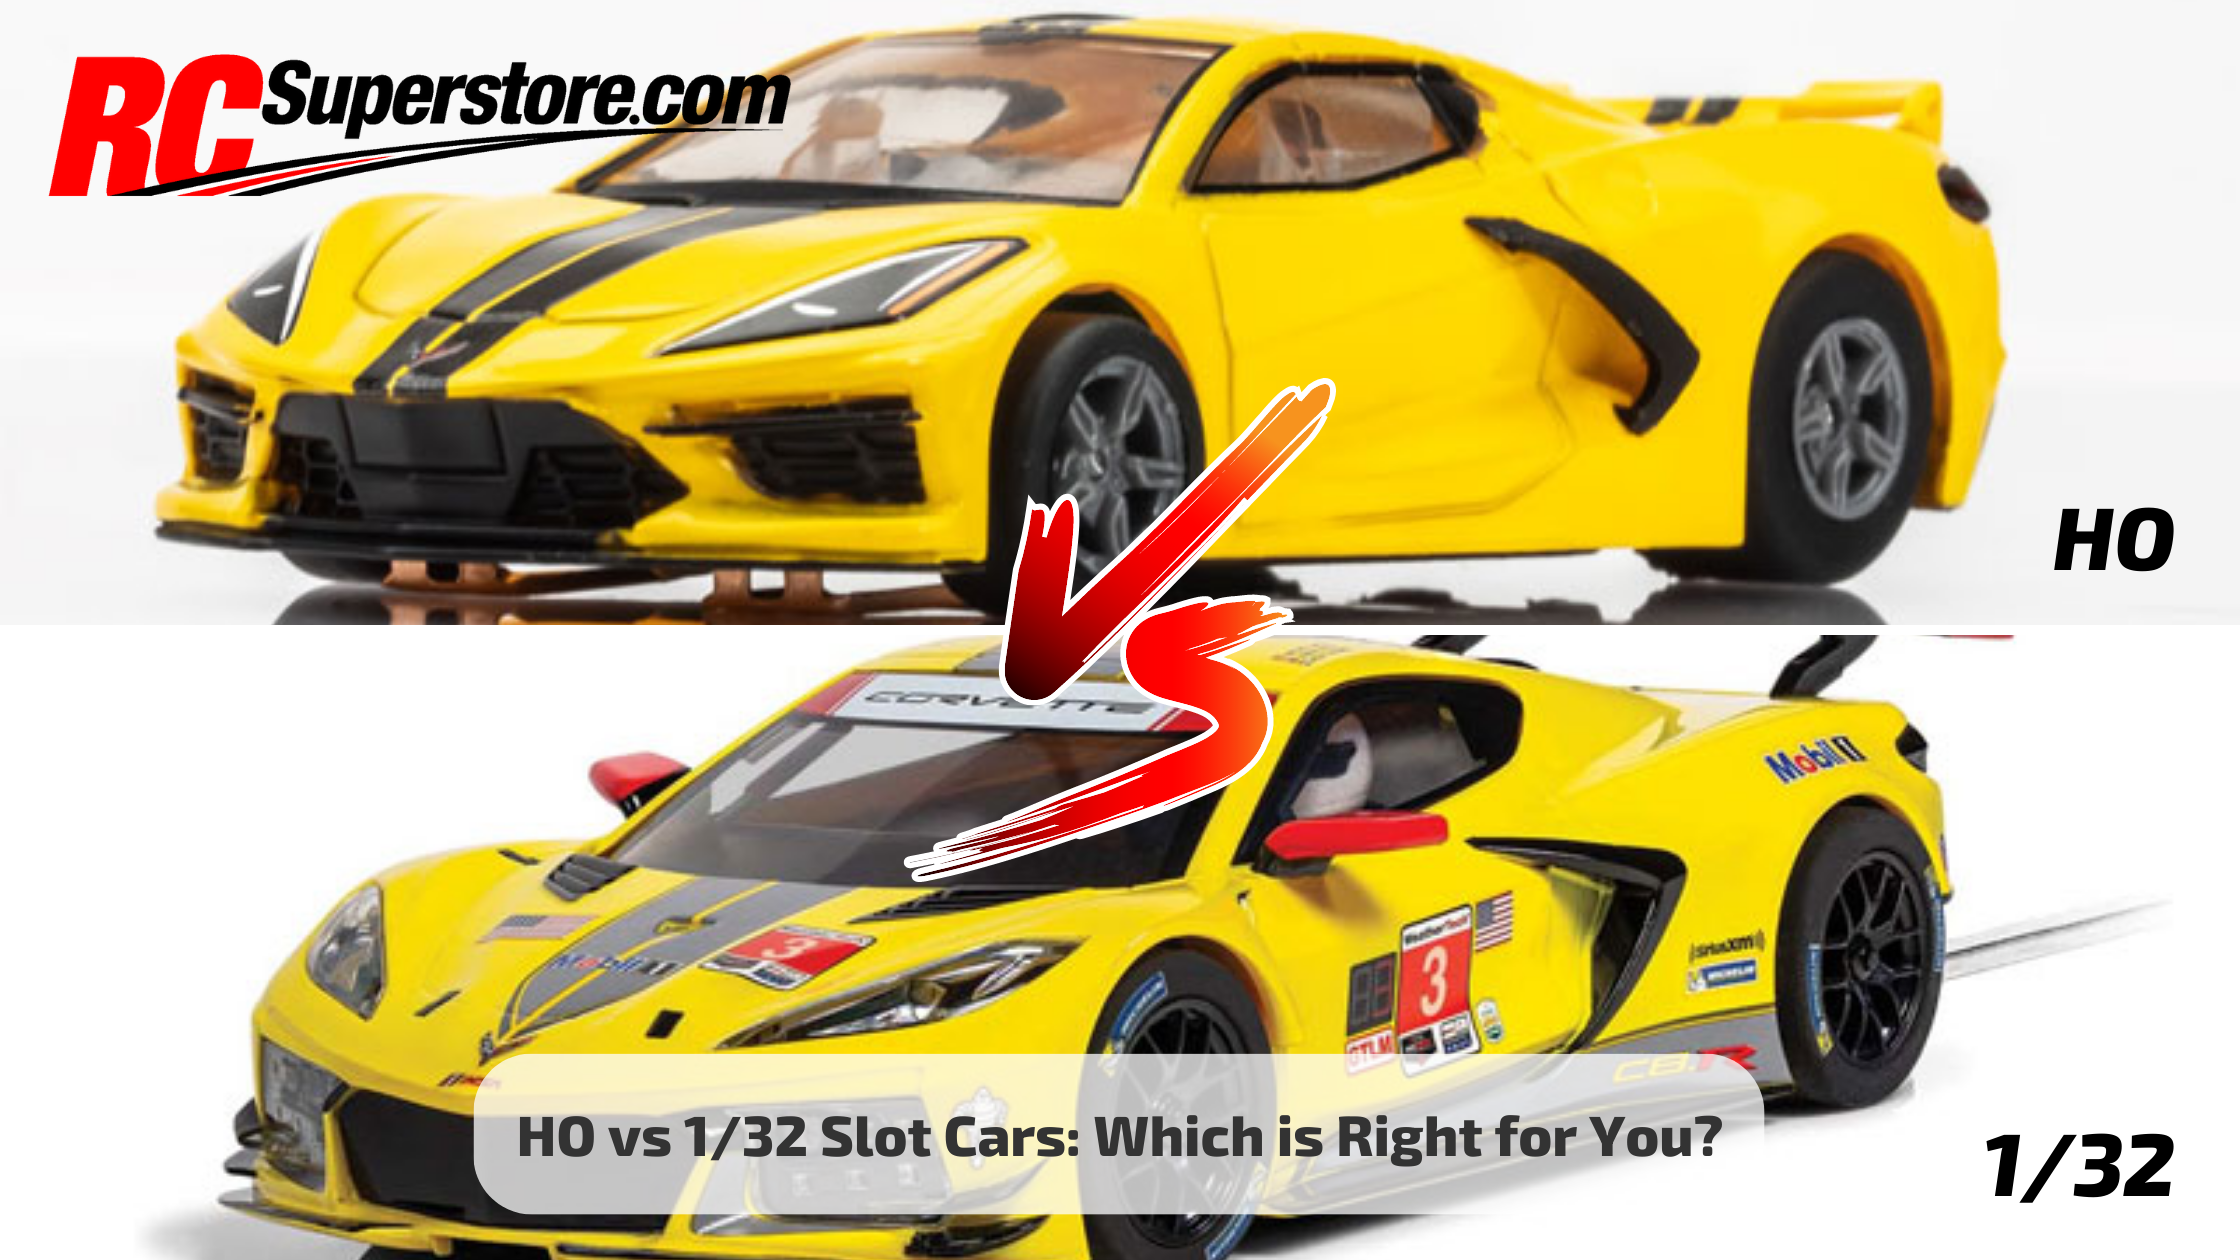 HO vs 1/32 Slot Cars: Which is Right For You?